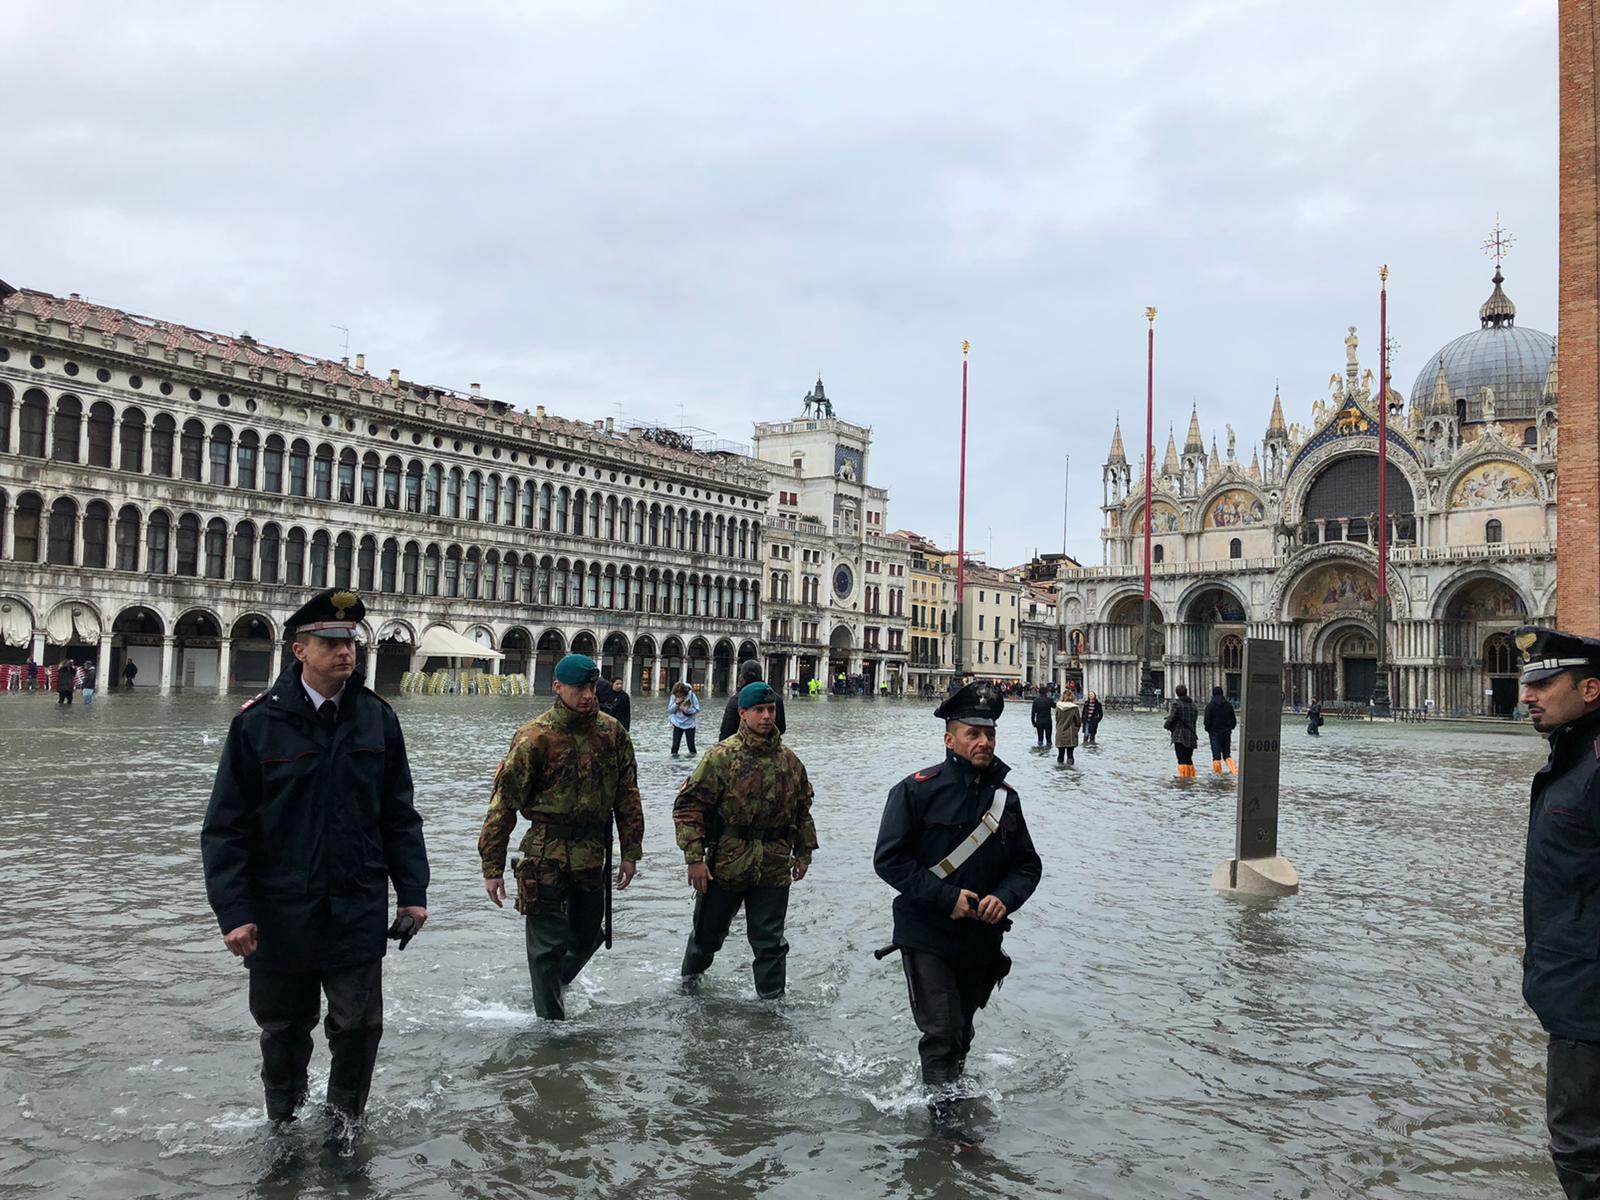 Venice underwater, massive damage: here are images of the disaster from the city 